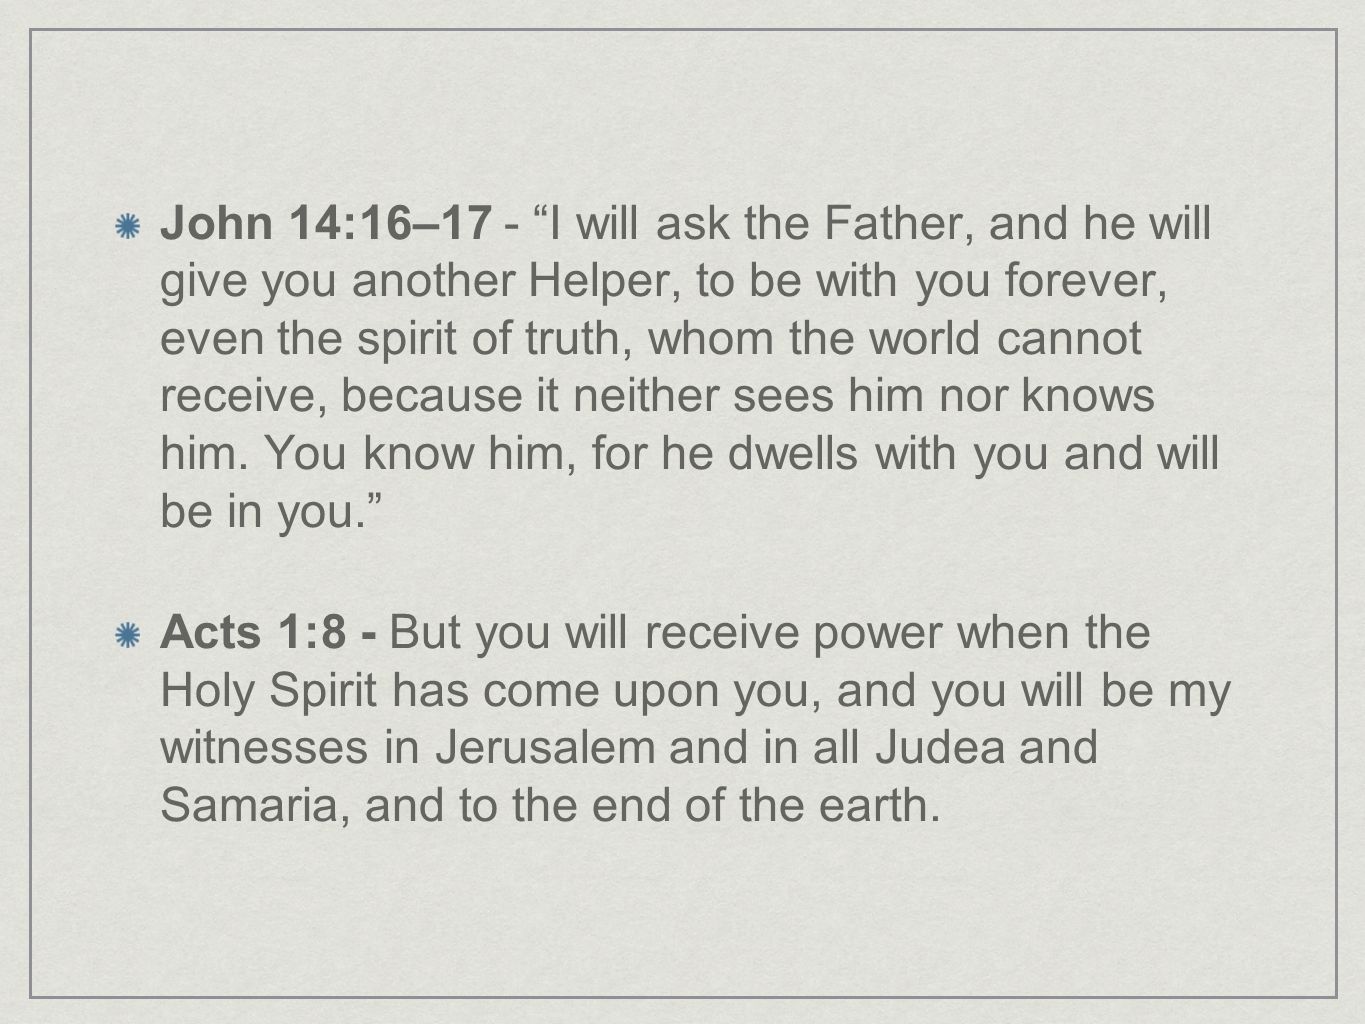 John 14:16–17 - I will ask the Father, and he will give you another Helper, to be with you forever, even the spirit of truth, whom the world cannot receive, because it neither sees him nor knows him. You know him, for he dwells with you and will be in you.